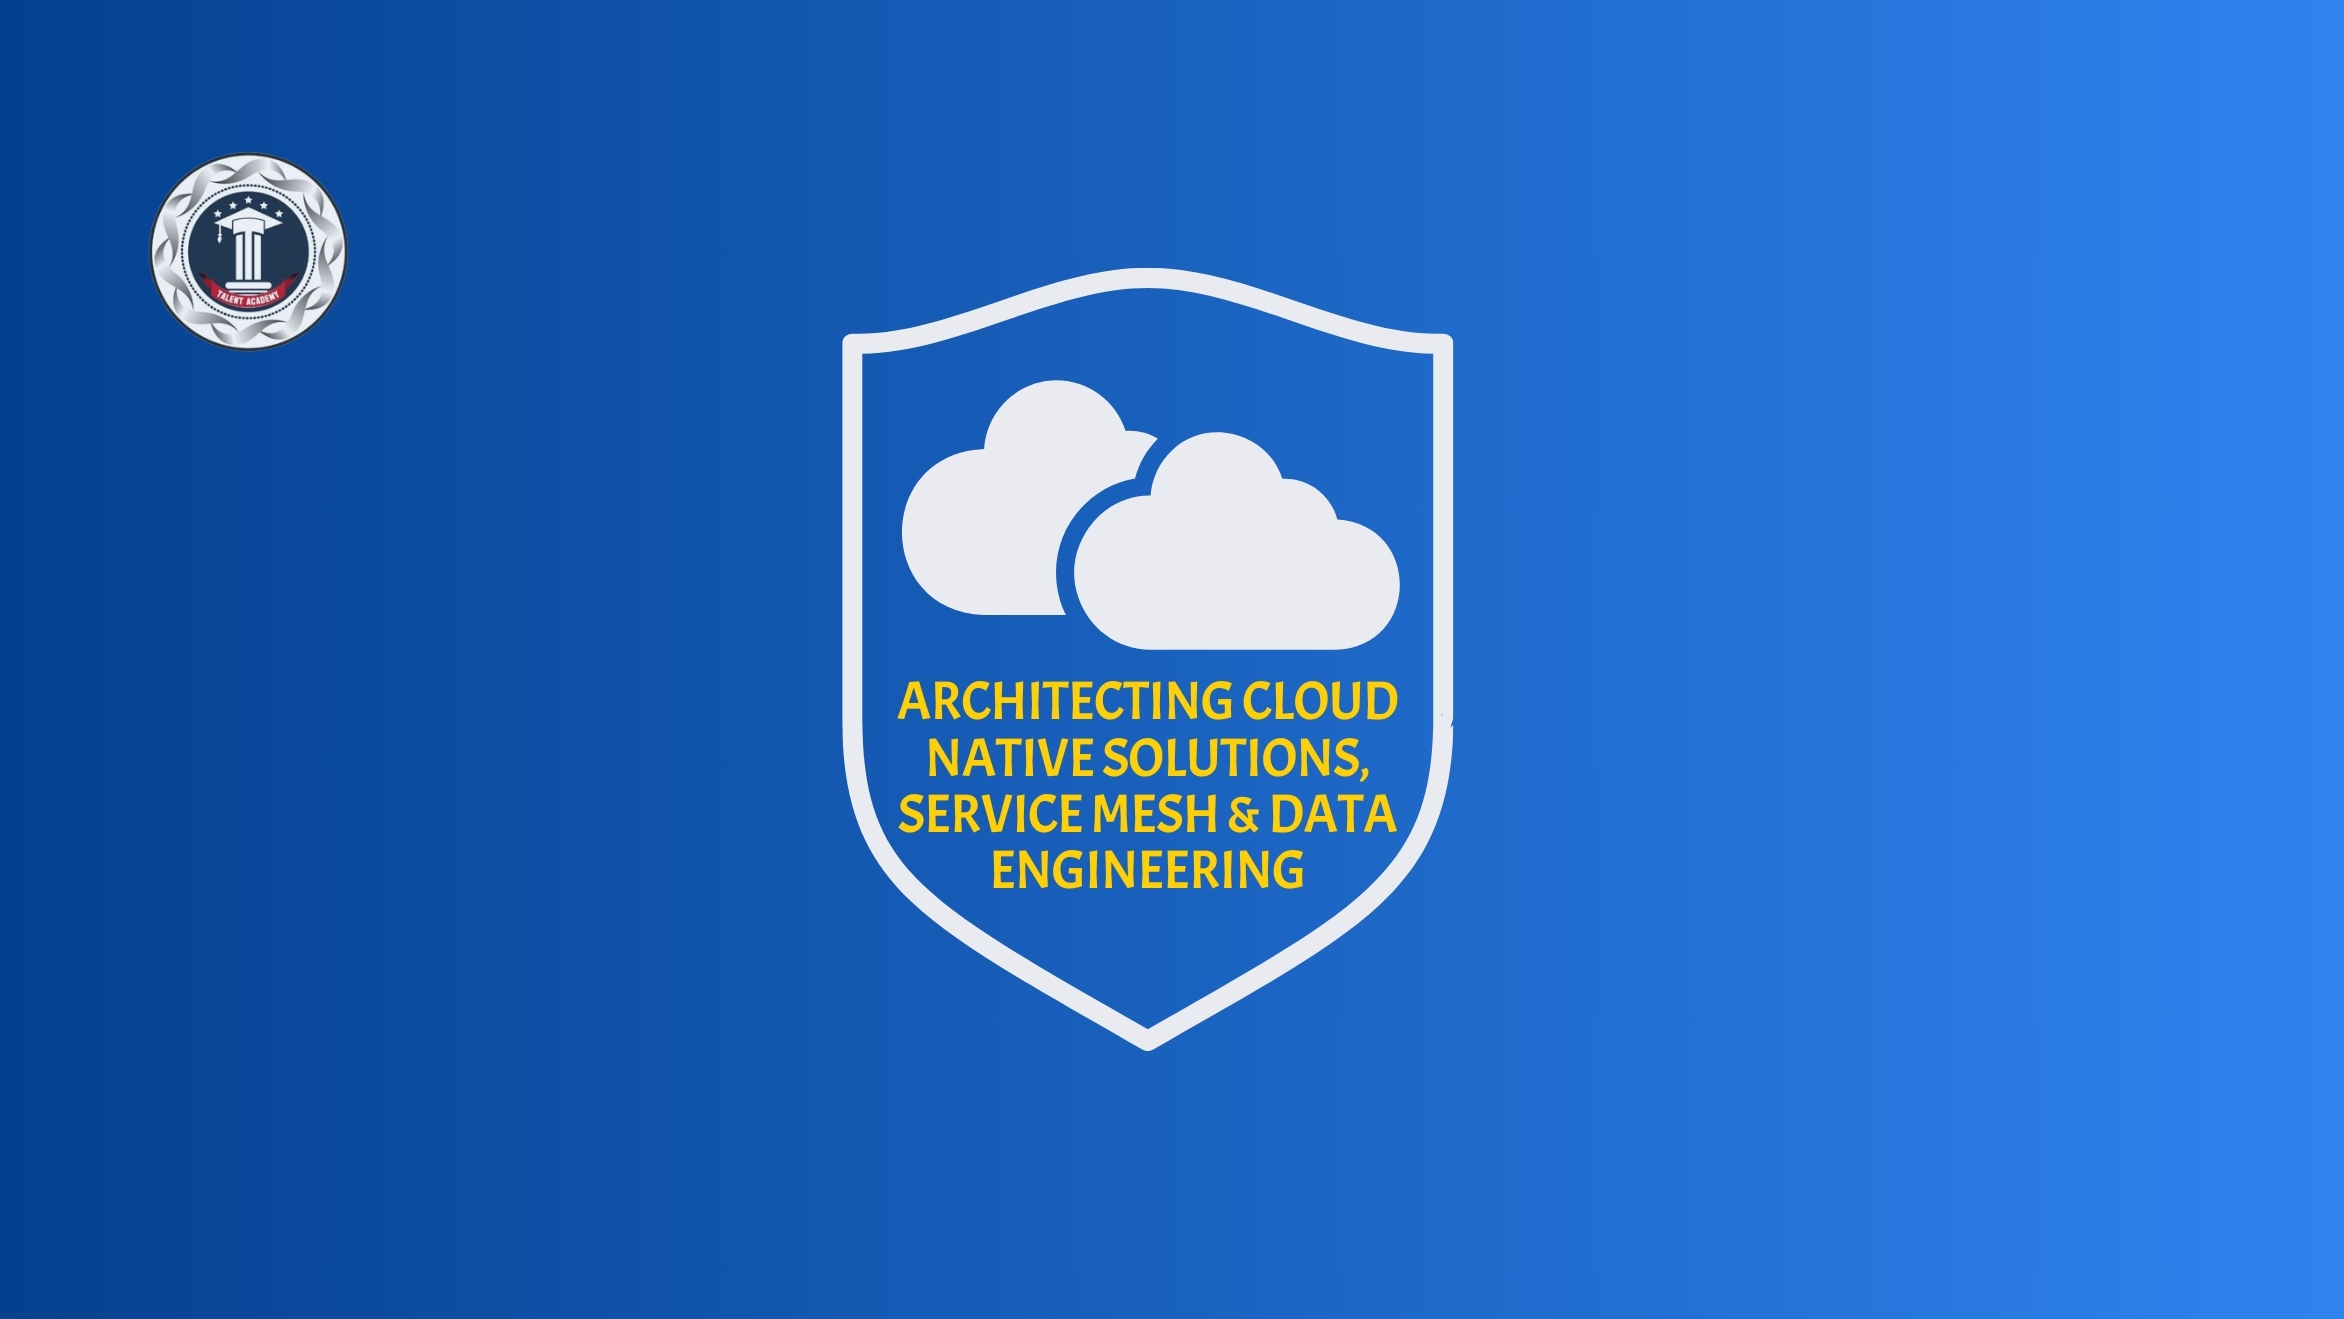 Architecting Cloud Native Solutions, Service Mesh & Data Engineering